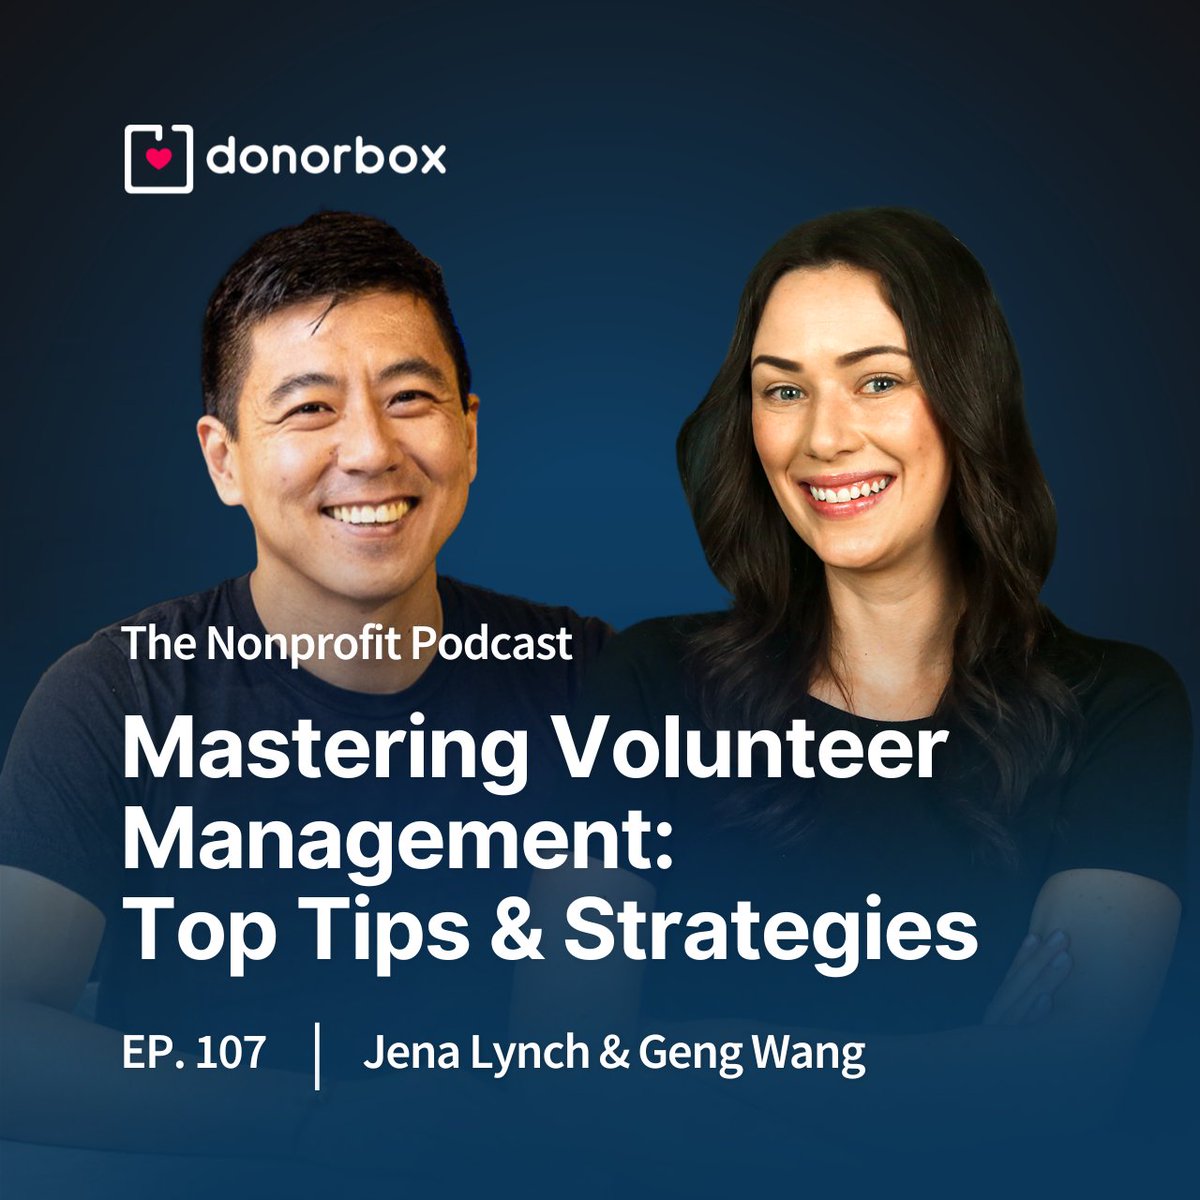 Join Jena & Geng Wang @CivicChamps for tips on vibrant volunteerism: Engage meaningfully, foster growth & appreciation, and tech-up! 🌟 🎙️ YouTube: ow.ly/RYUQ50R44Jq 🎙️ Apple: ow.ly/wly350R44Js 🎙️Spotify: ow.ly/Yjgc50R44Jr #Volunteers #Nonprofit #Leadership